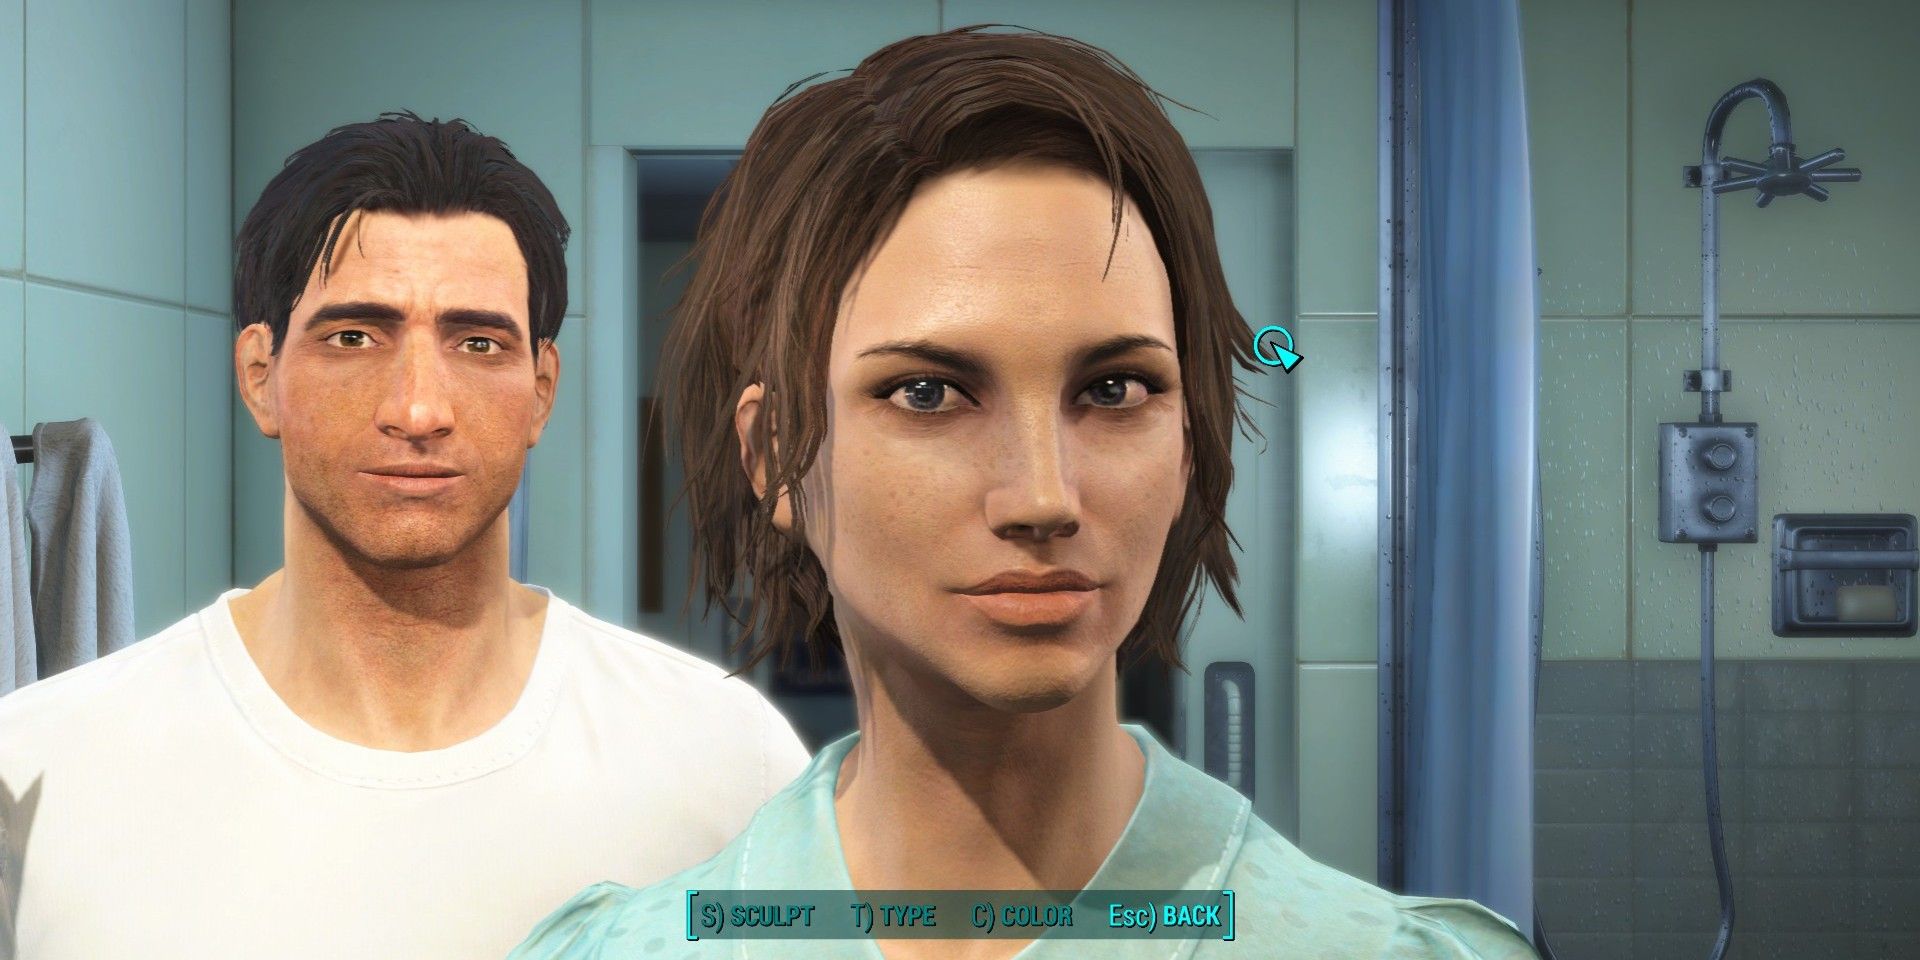 Fallout 4 character creator screen with the player currently slecting Nora over Nate